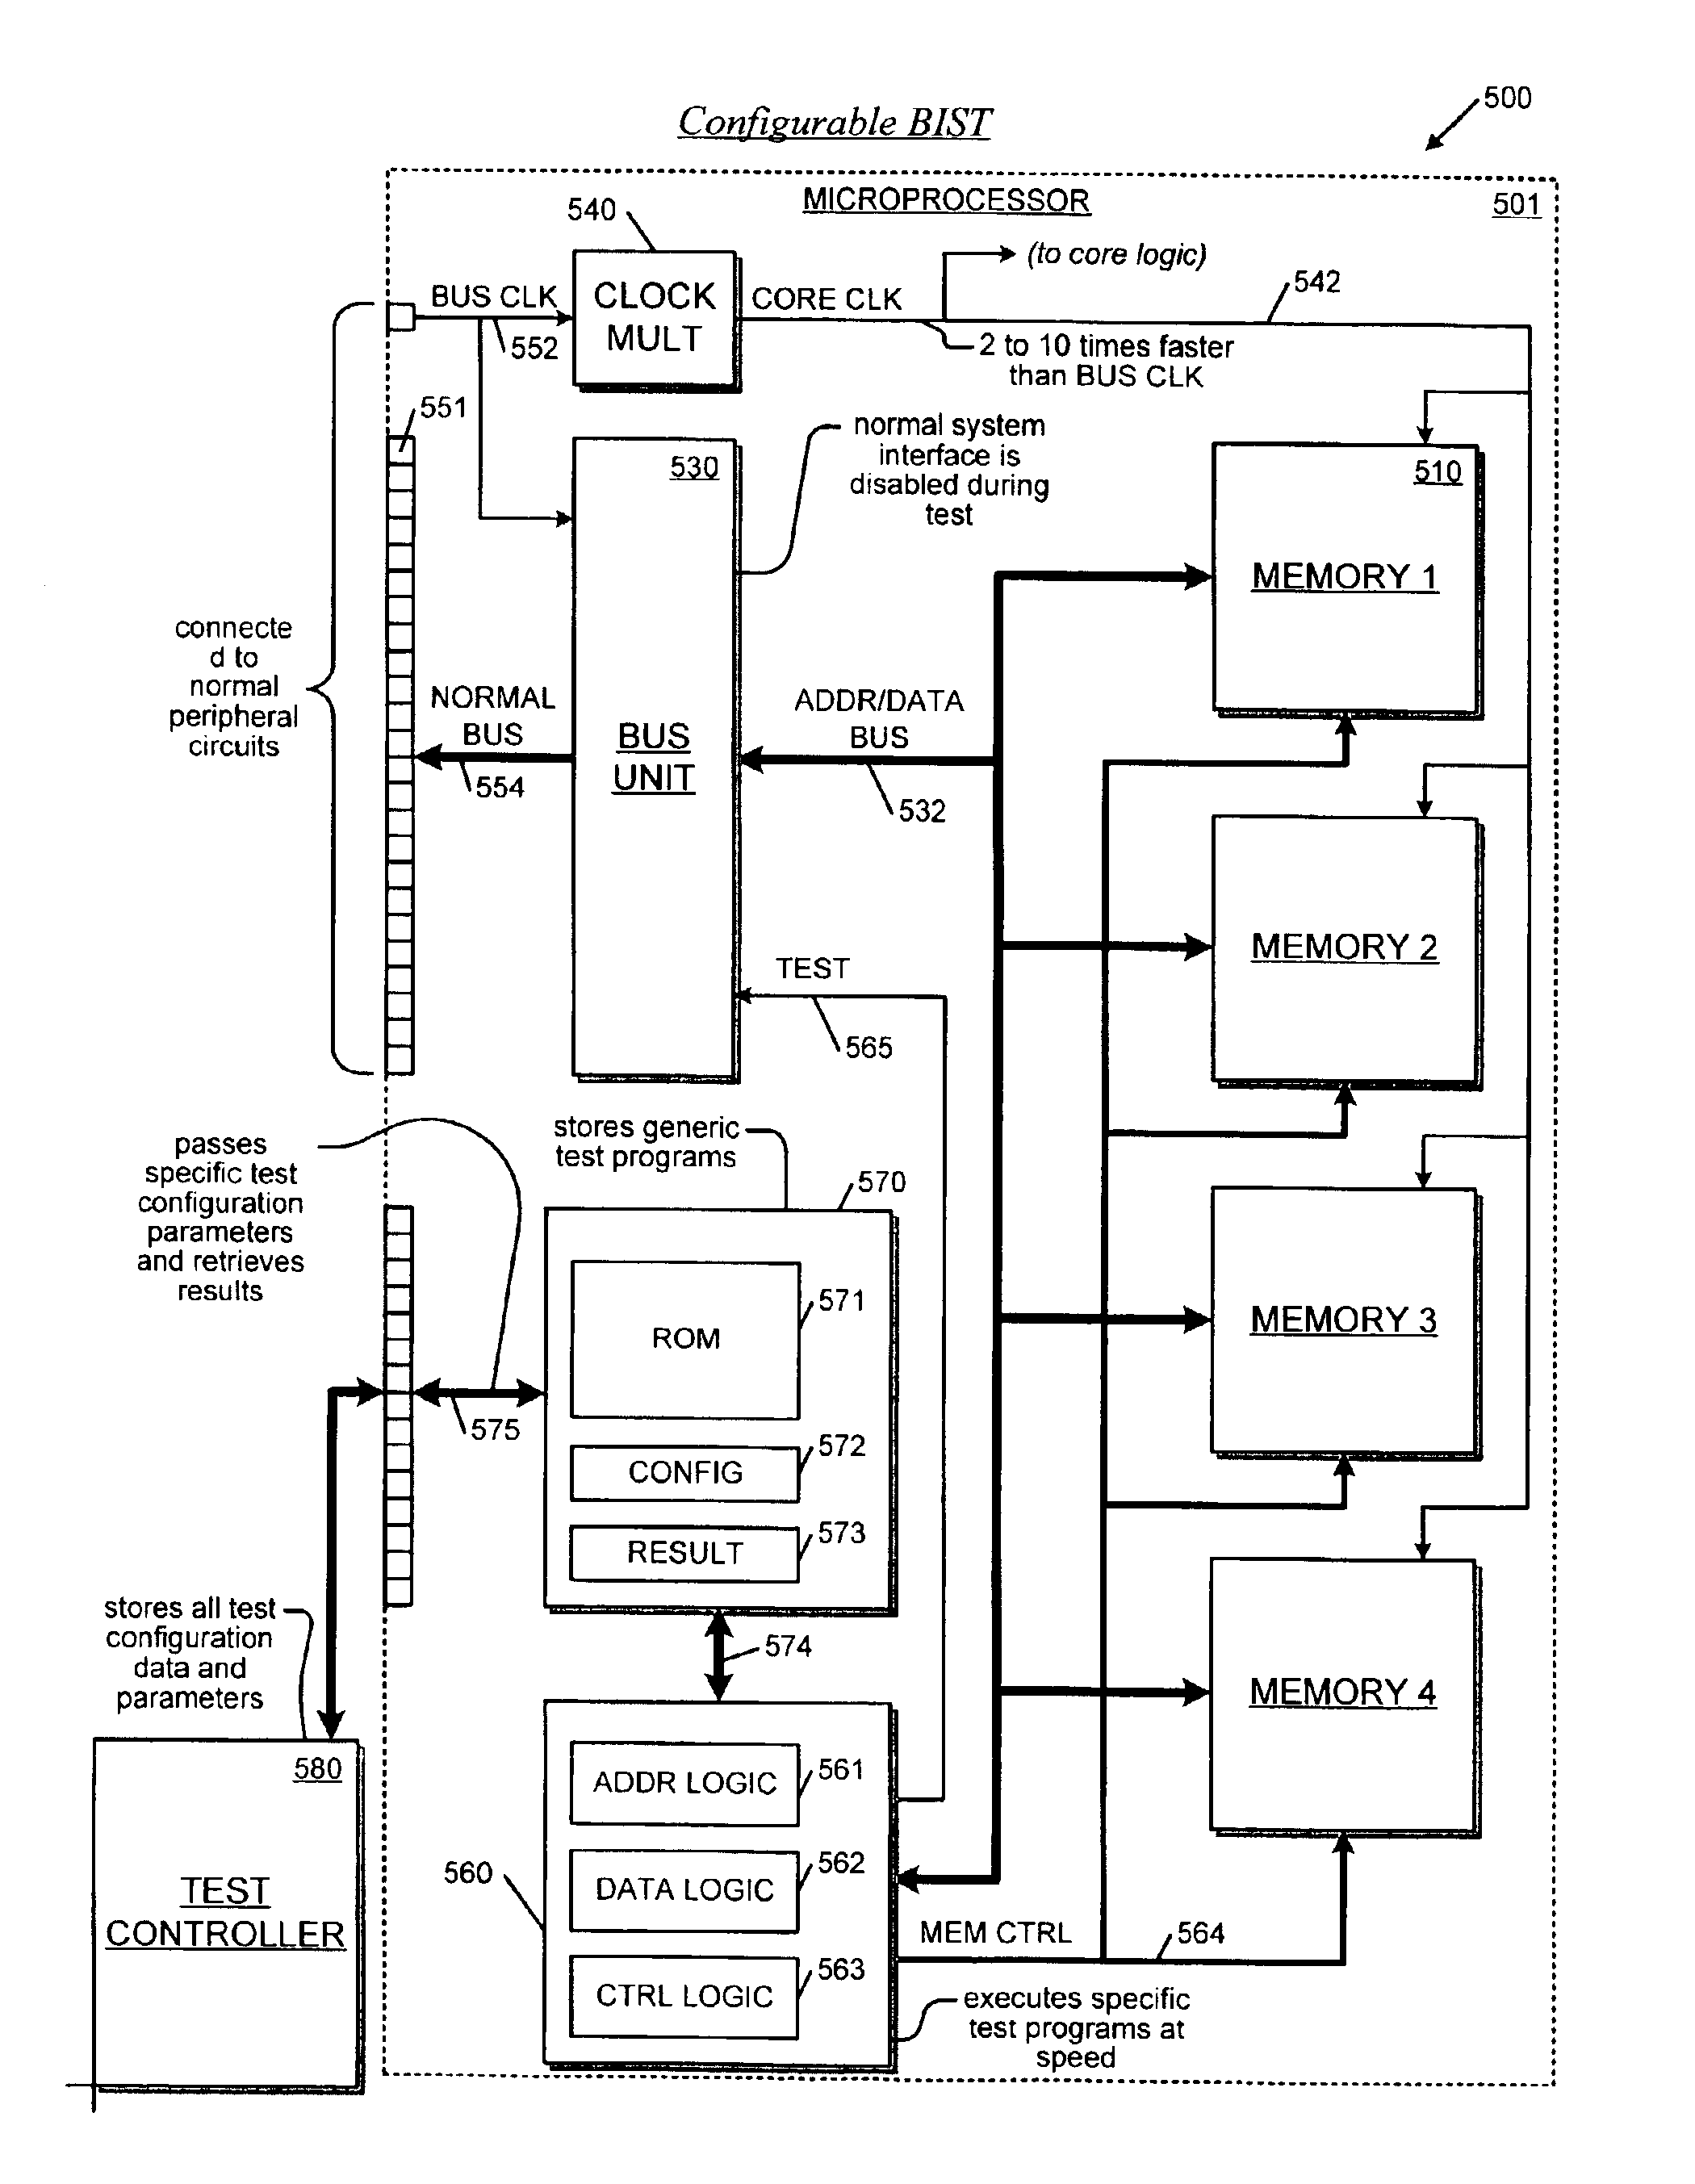 Apparatus and method for testing memory in a microprocessor